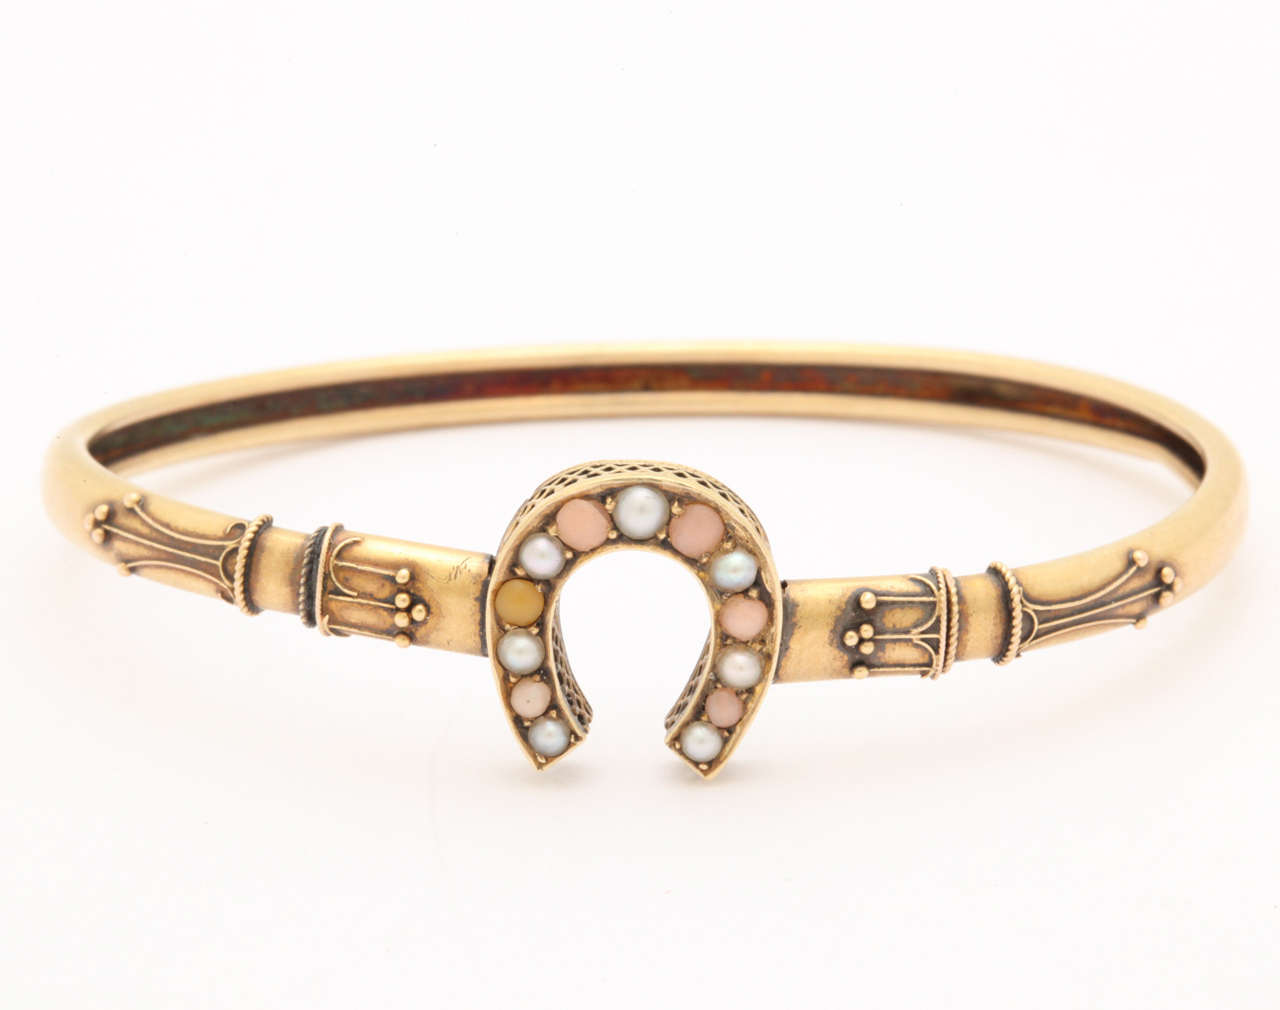 The beautifully executed details are typical of the goldsmiths of the Victorian era. The bracelet is 14 kt gold and the horse shoe is decorated with angel skin coral cabs and half pearls. The delicate bracelet opens with a spring action and fits an